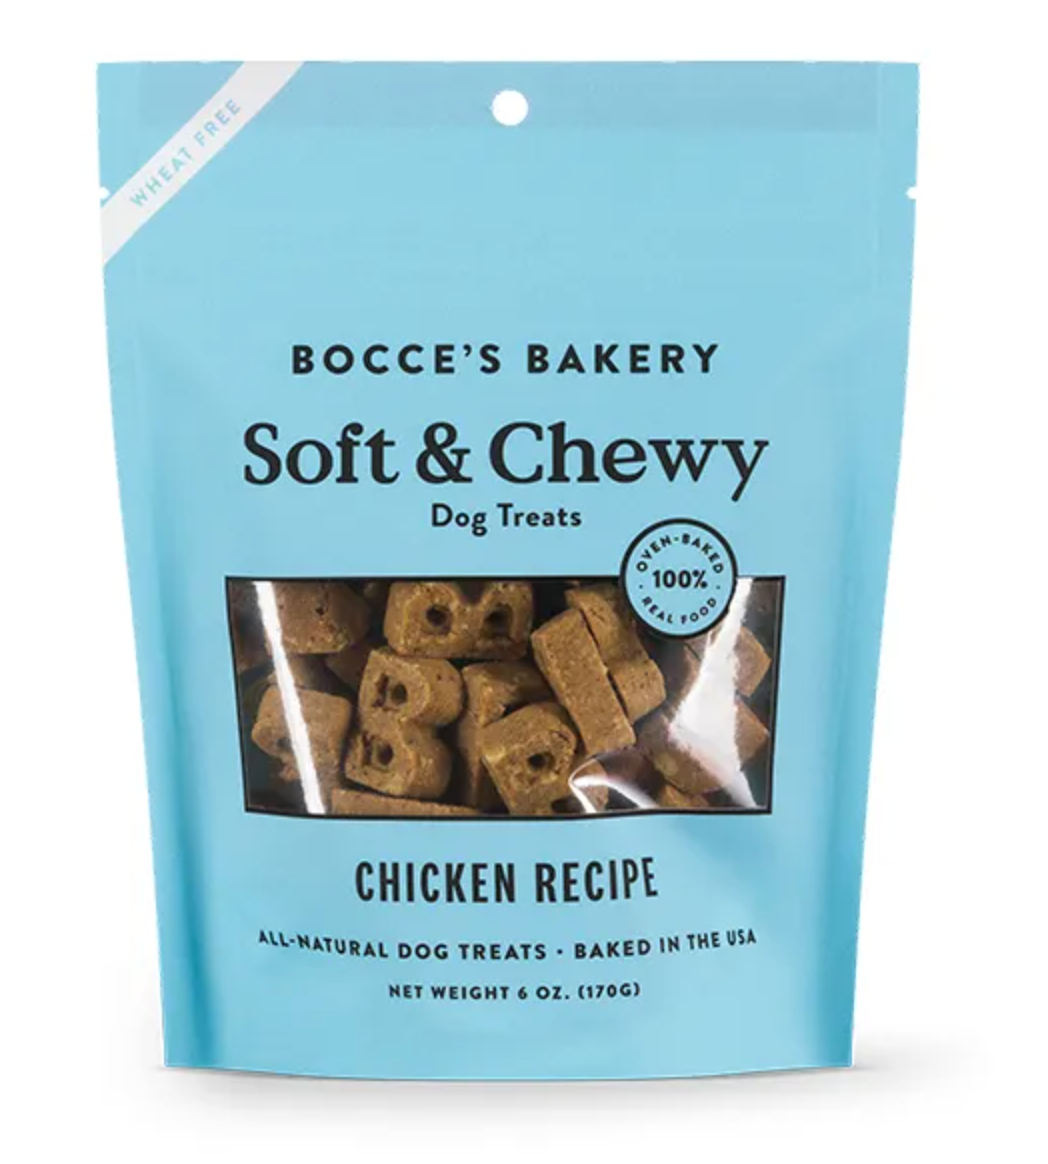 Bocce's Bakery Soft & Chewy Wheat Free Chicken Dog Treats